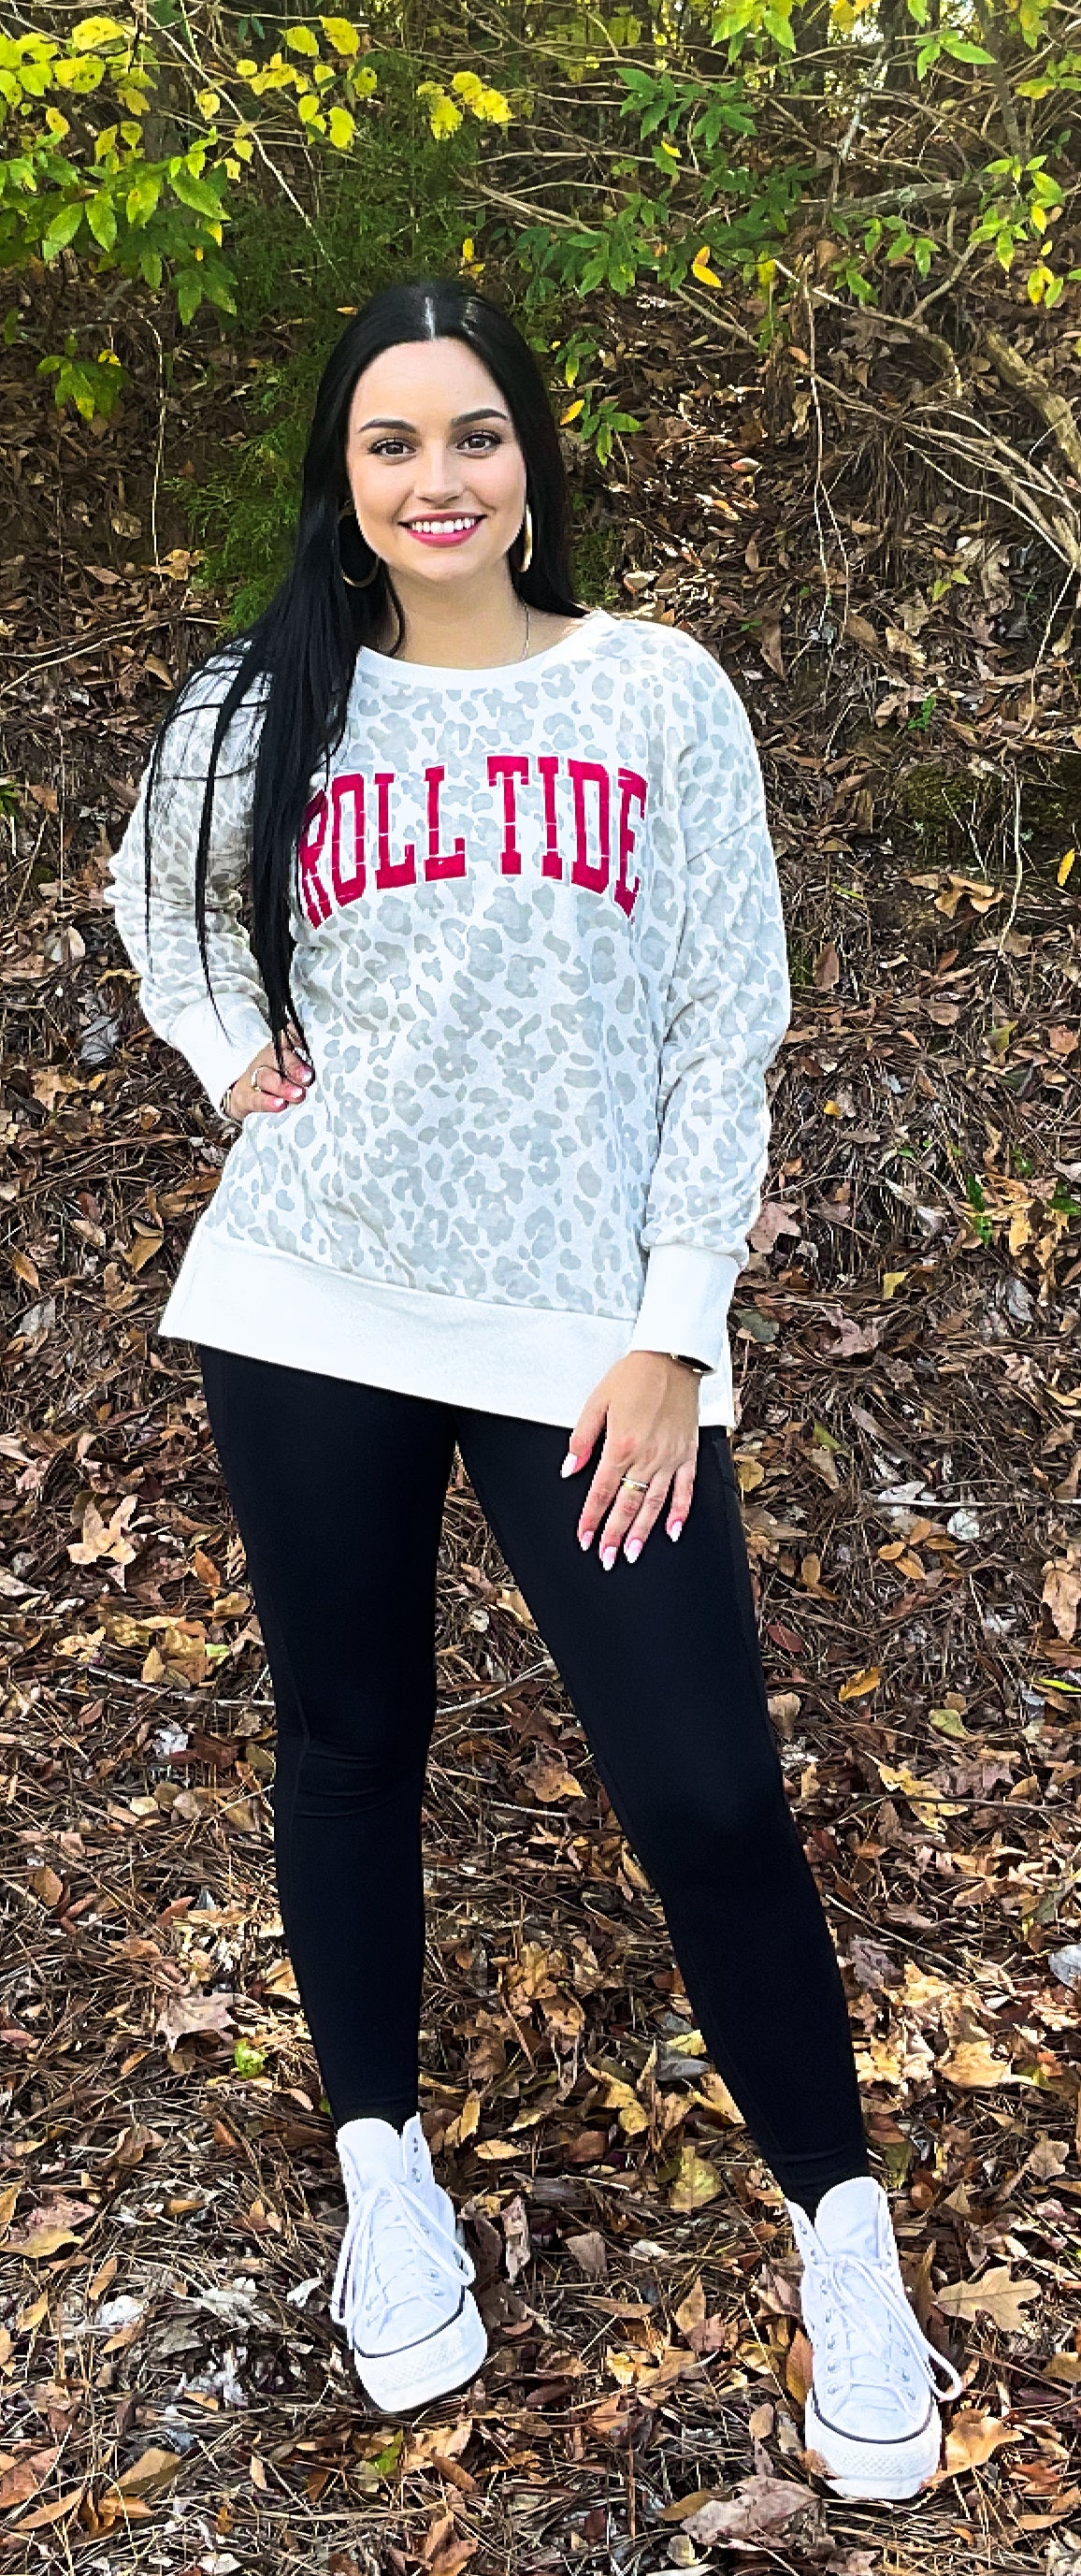 Gameday Couture Alabama Day Off Split Womens Pullover (White)